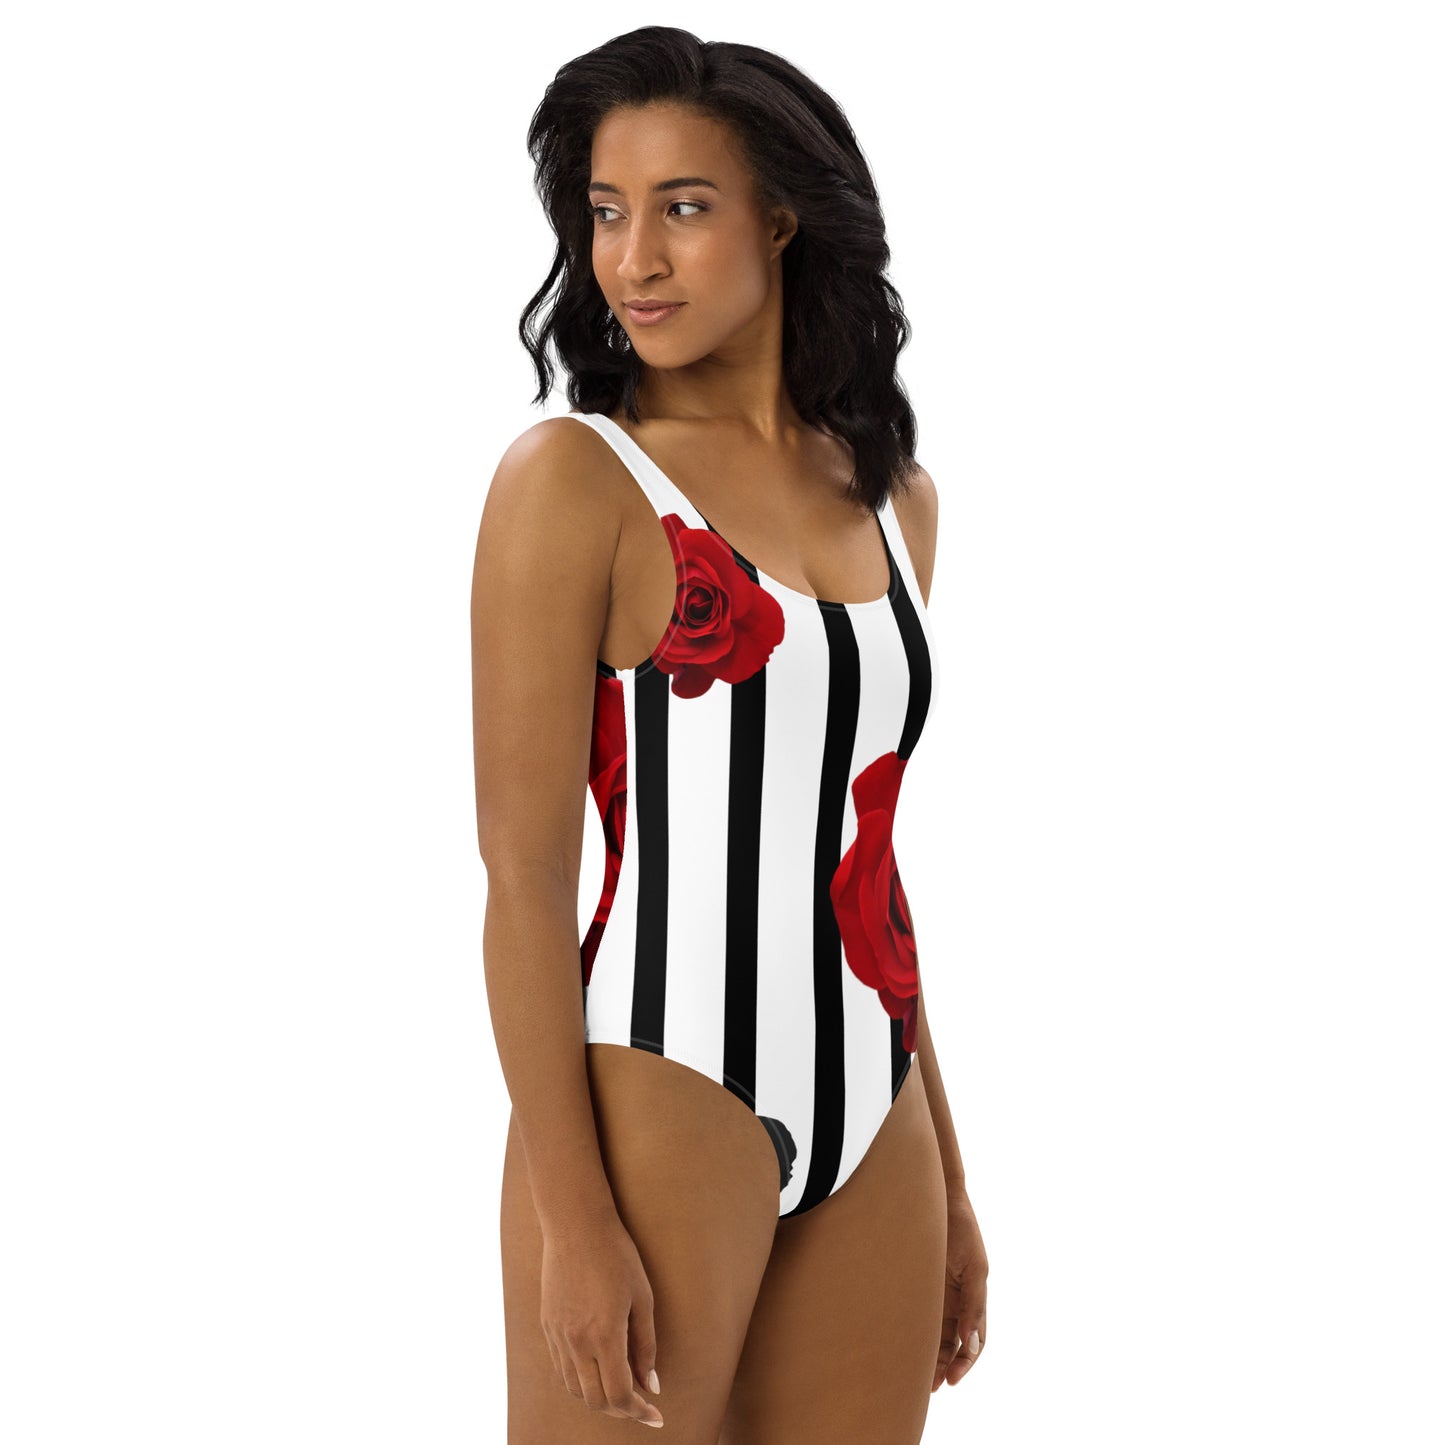 One-Piece Swimsuit With Stripes And Roses